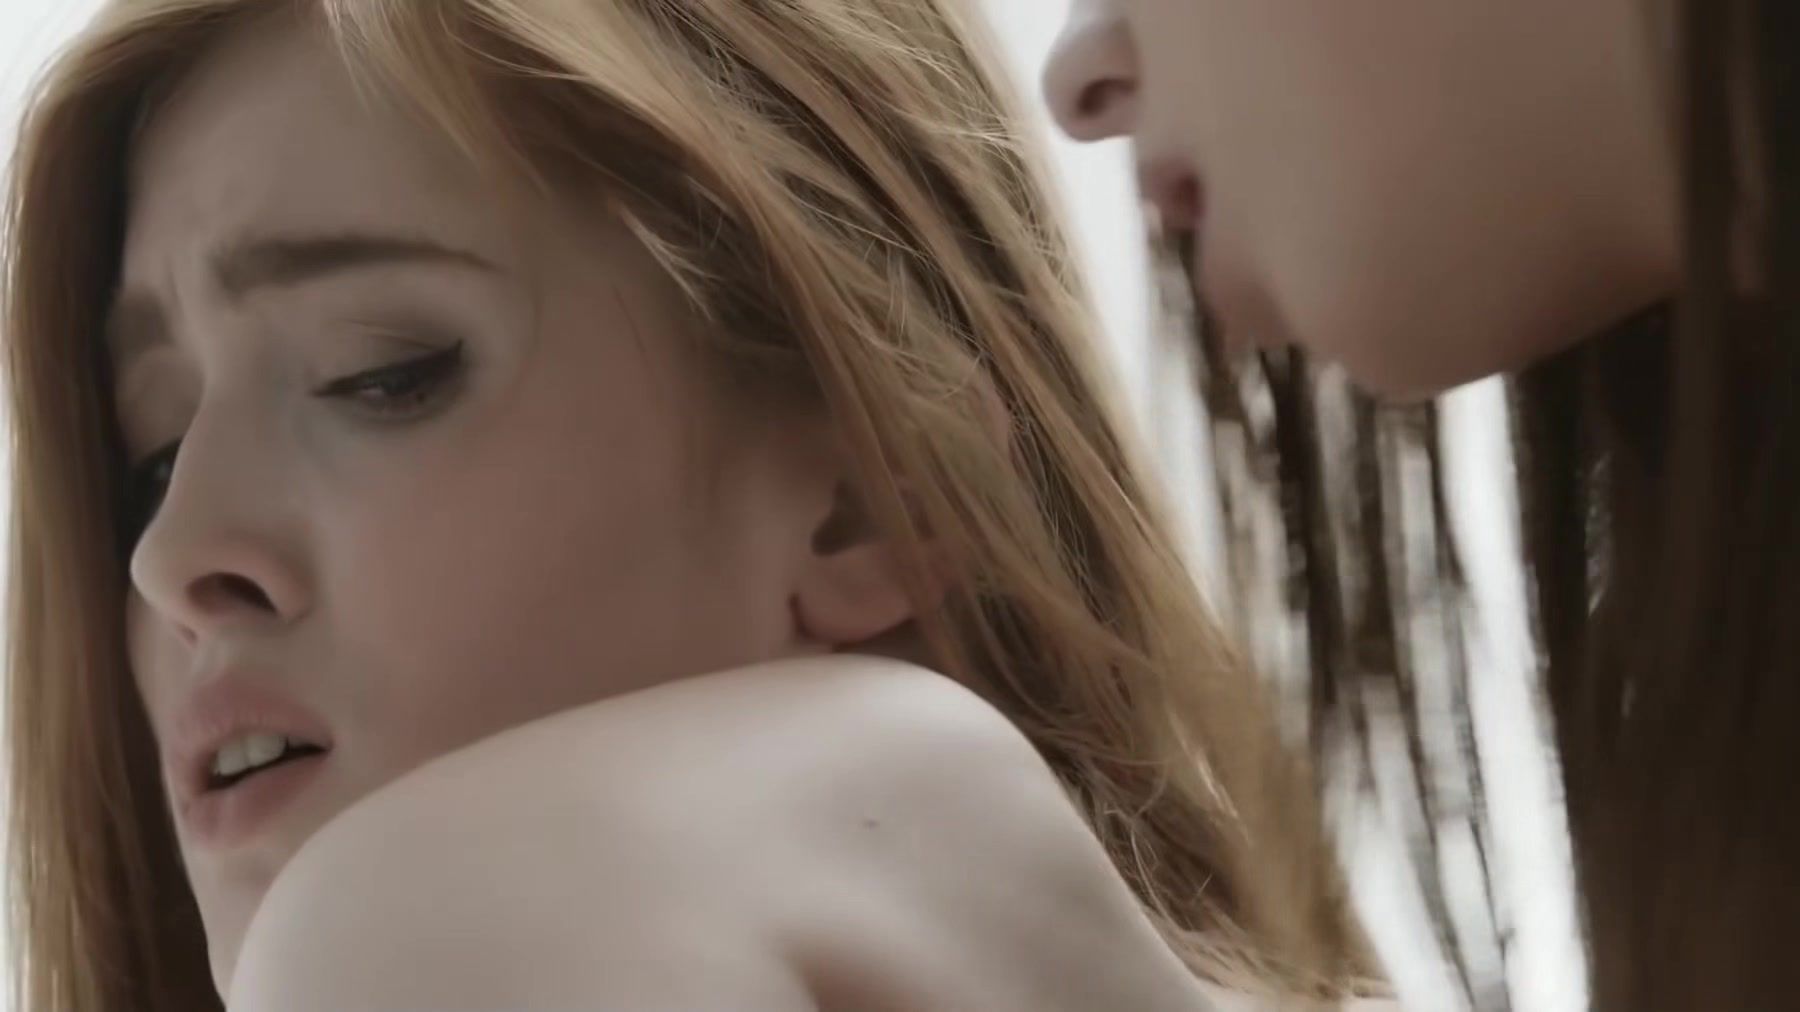 BrokenTeens Jia Lissa And Sabrisse - Sexy Lesbians Use Rope And Mature - 1